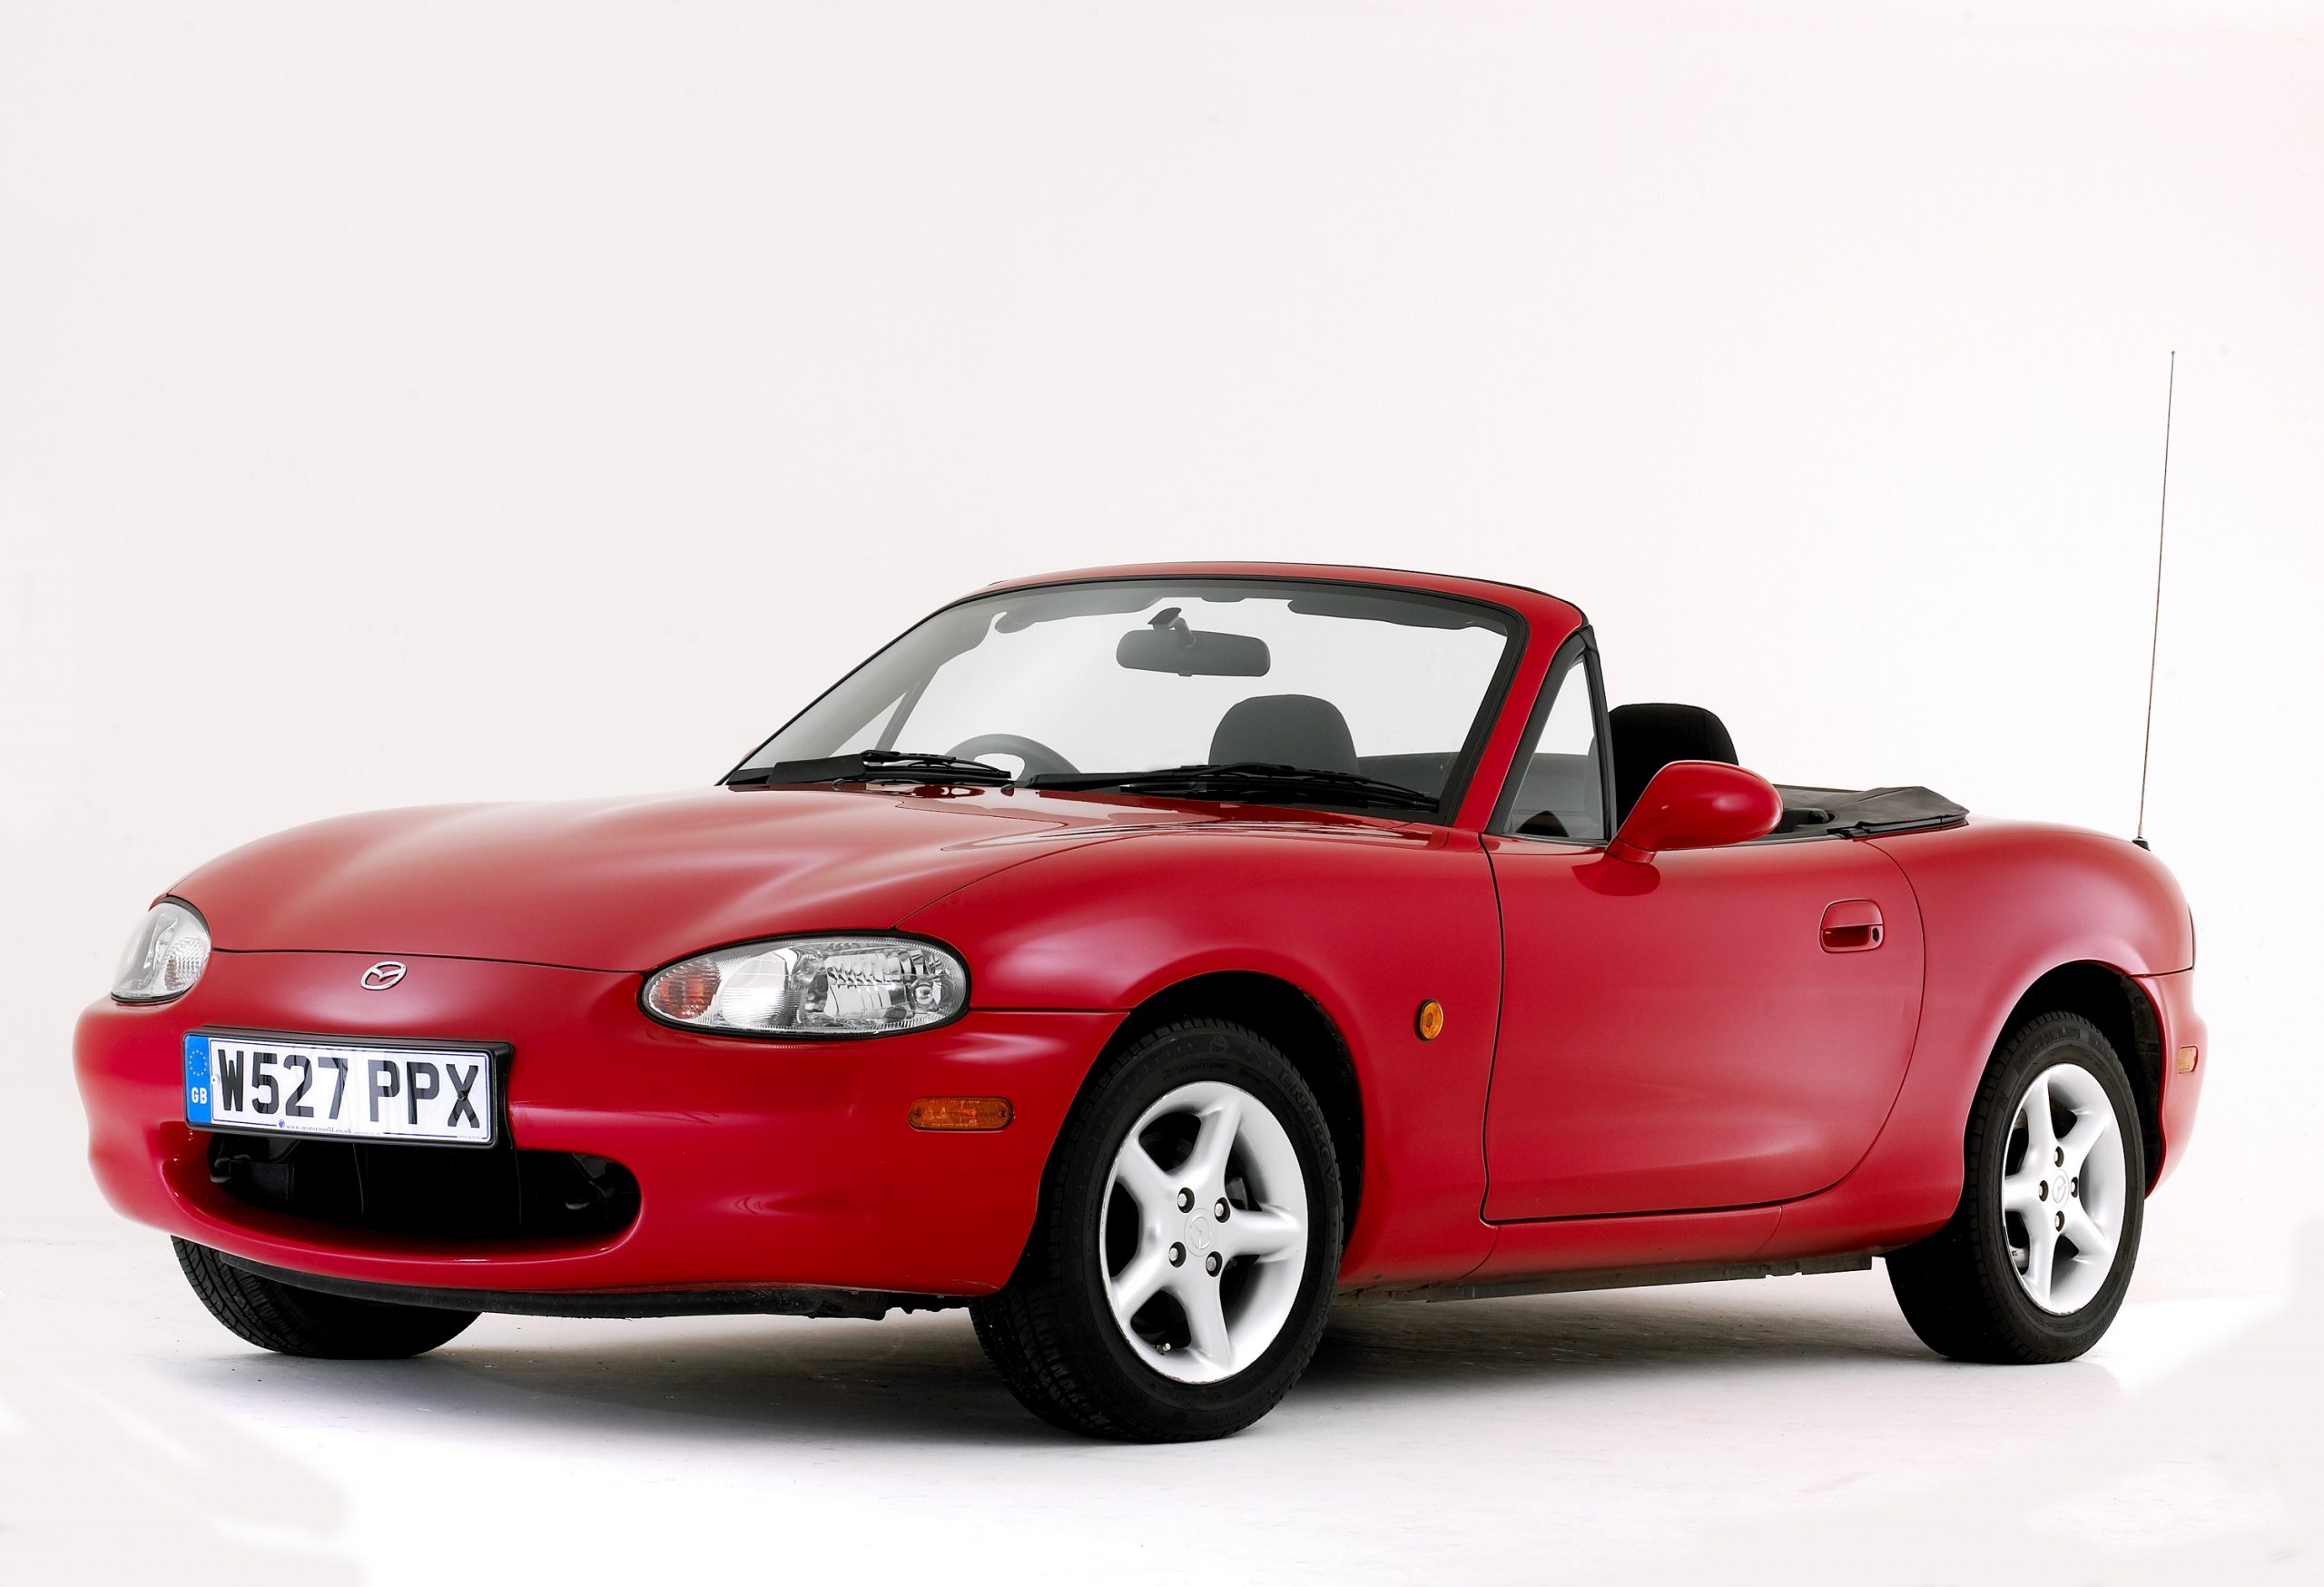 A red convertible Mazda Miata shot from the front 3/4 in a photo studio